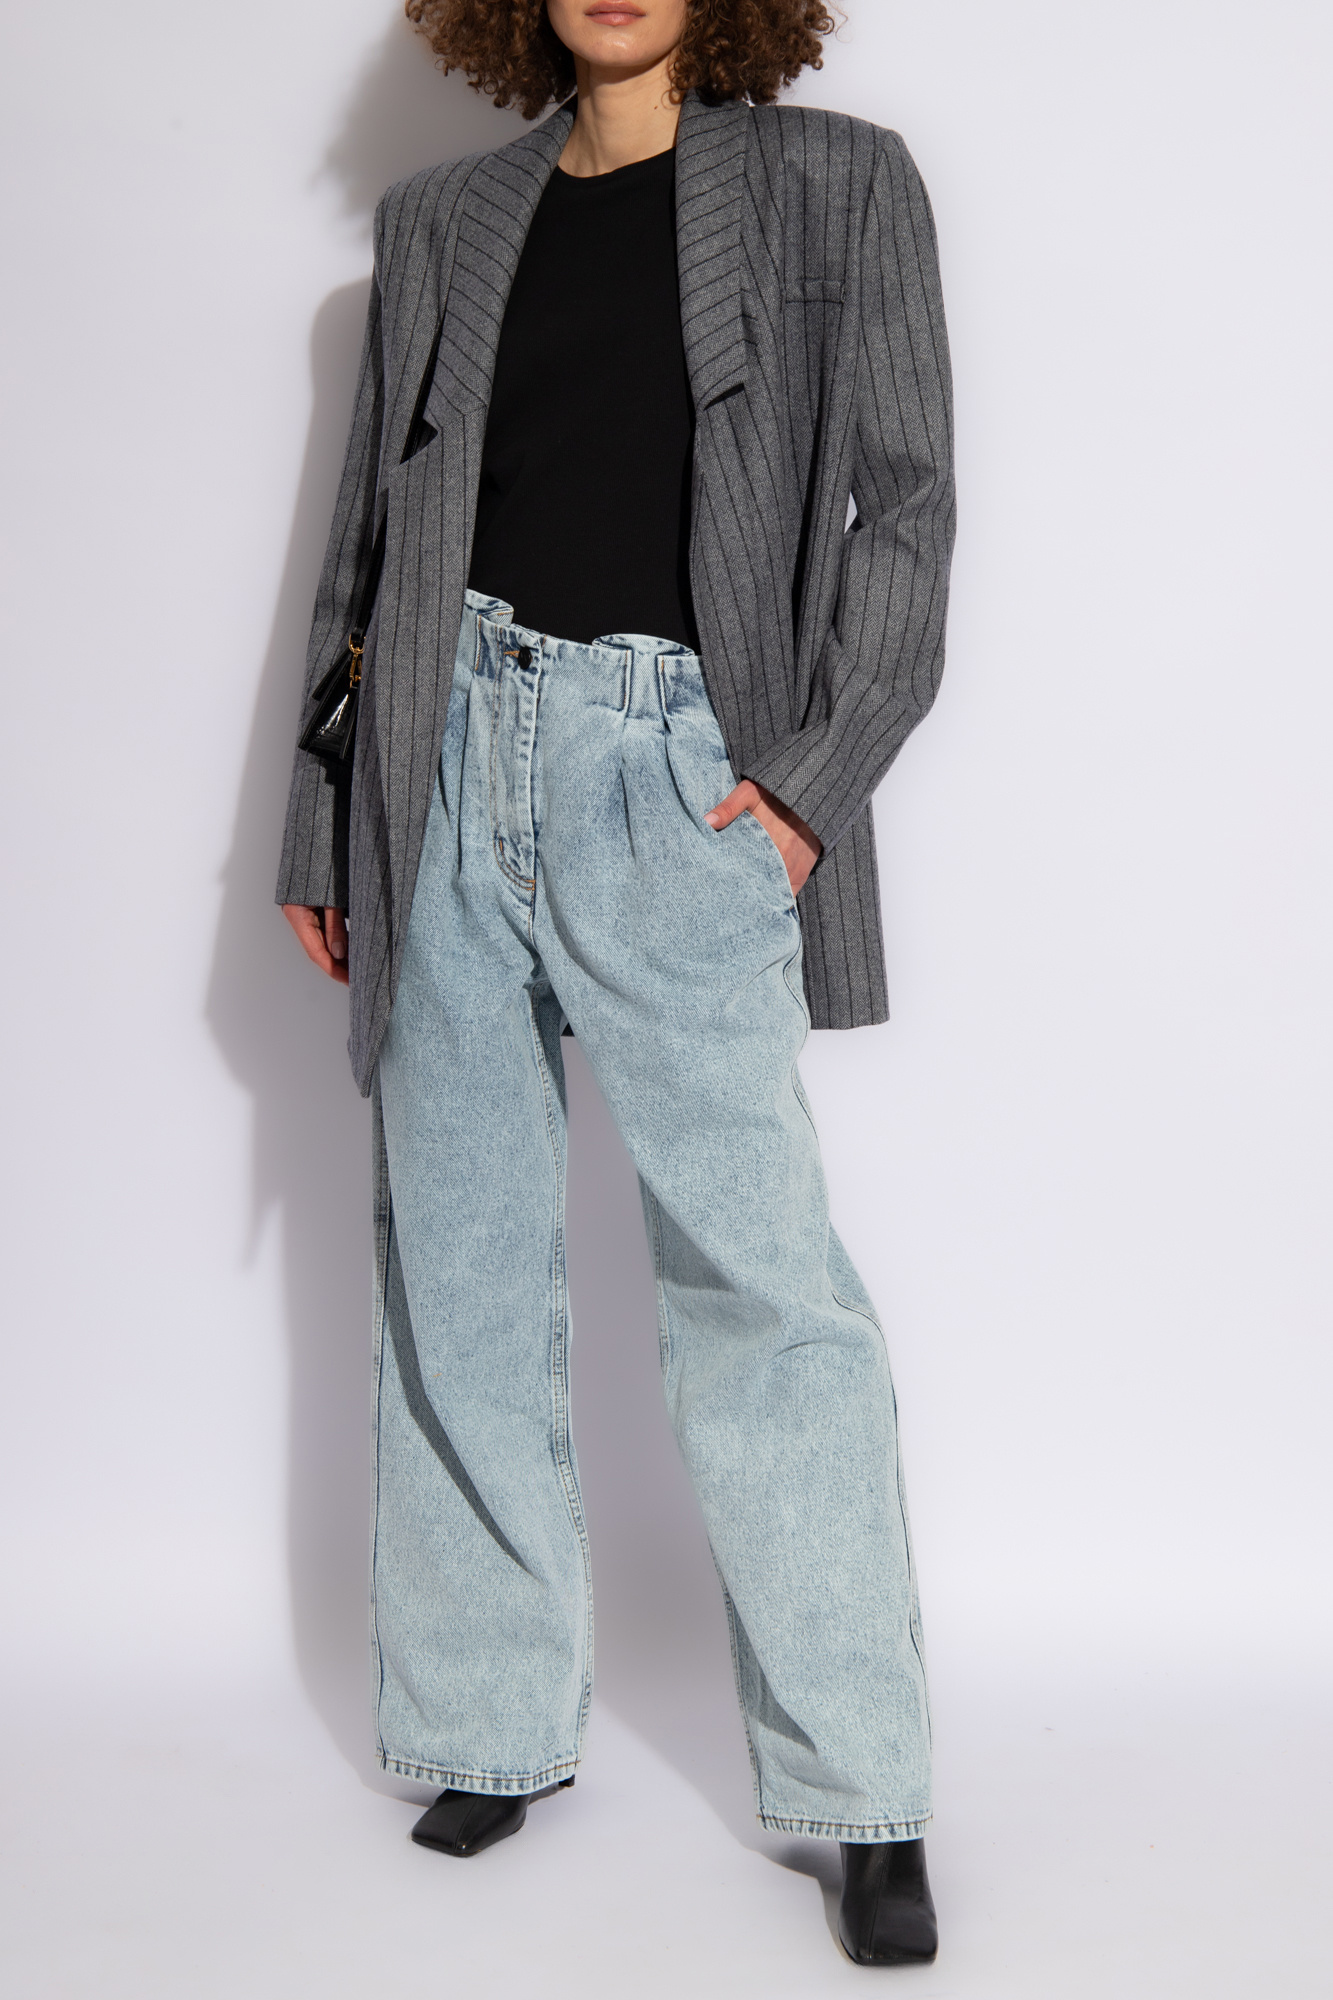 The Mannei ‘Aspos’ jeans with pleats